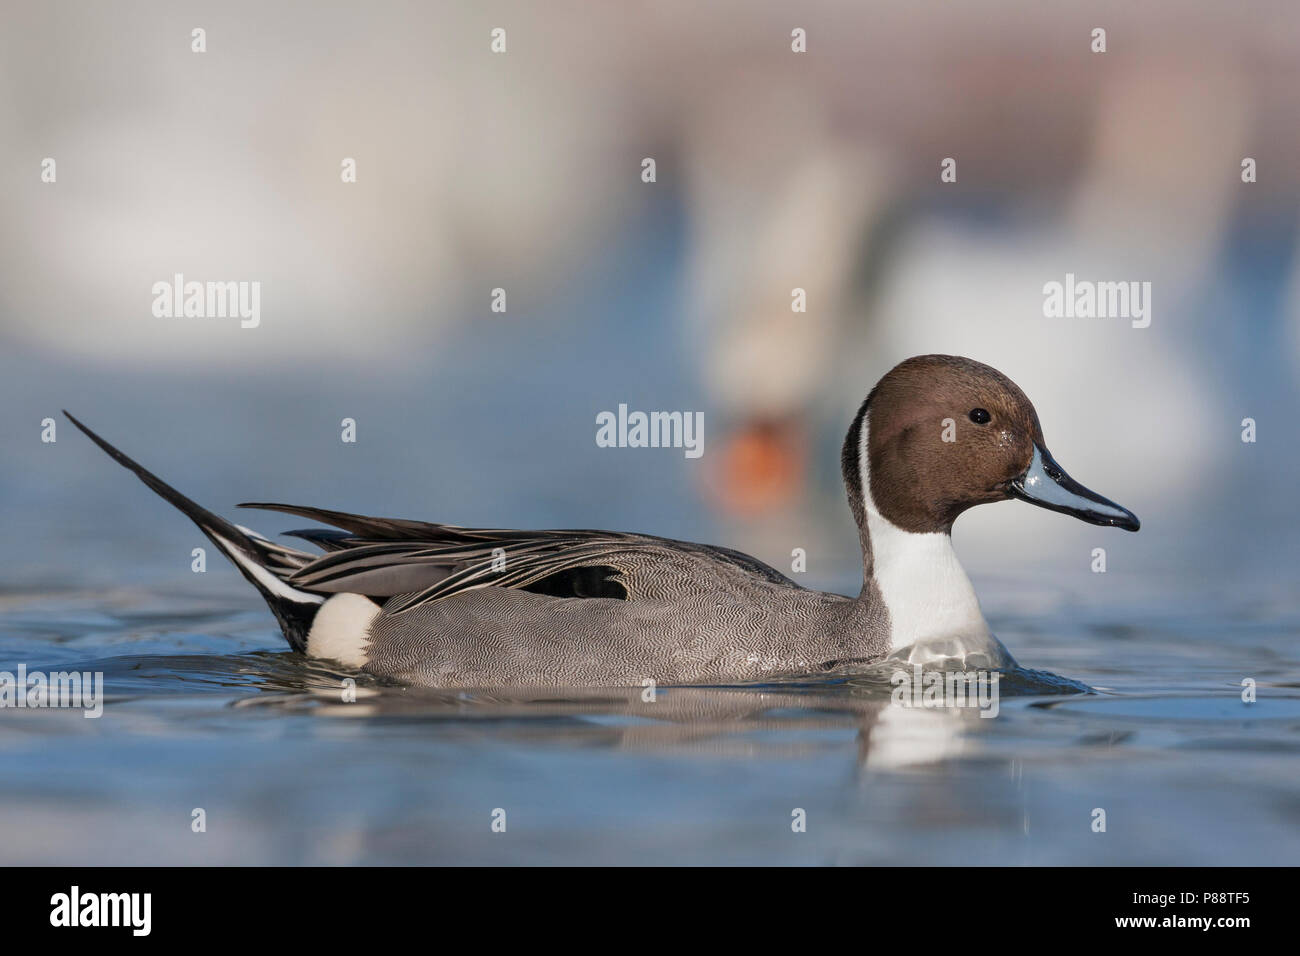 Northern Pintail, Pijlstaart, Anas acuta, Germany, adult male Stock Photo